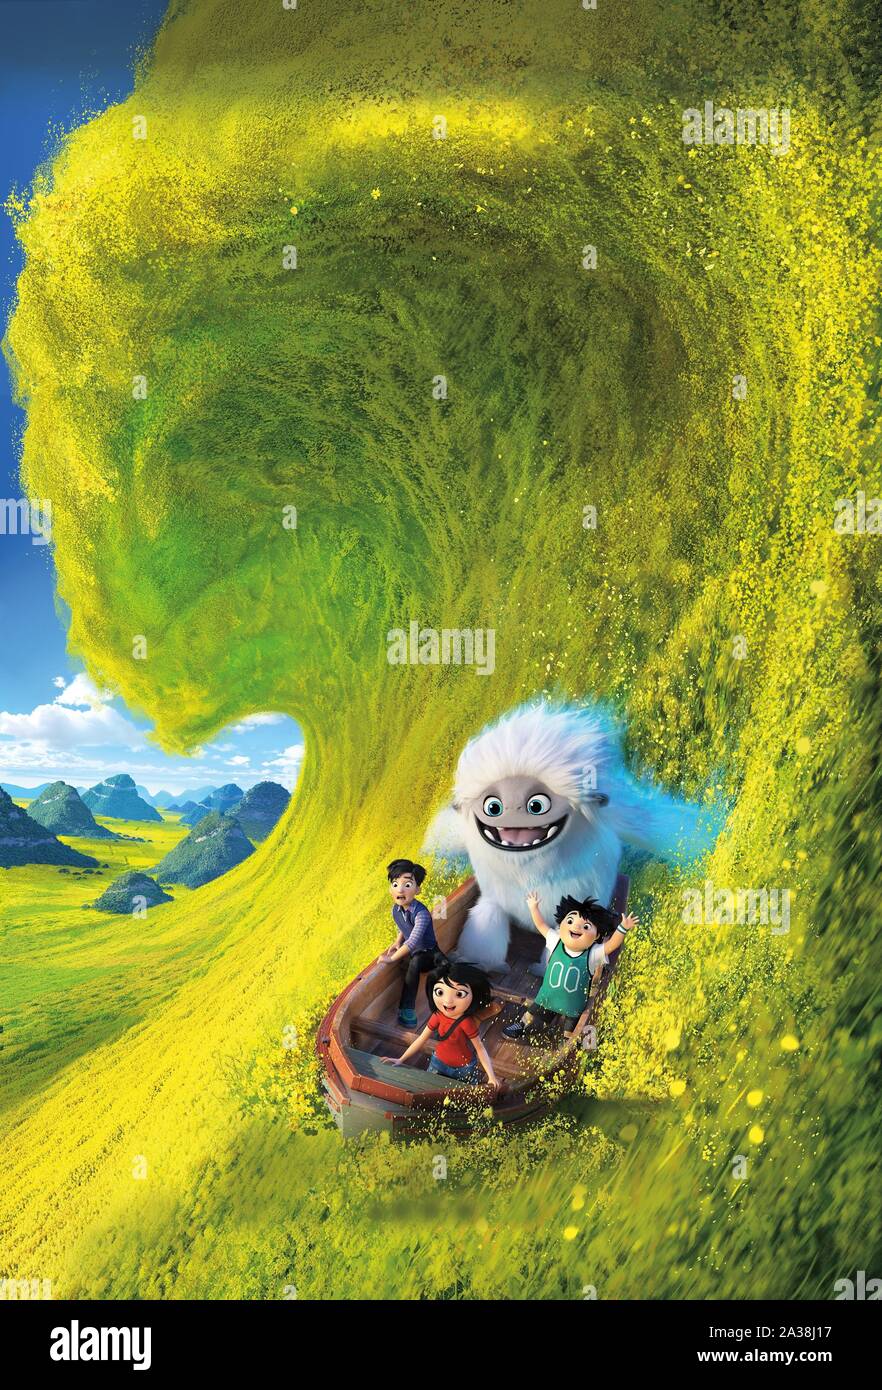 ABOMINABLE (2019), directed by JILL CULTON. Credit: DREAMWORKS ANIMATION / Album Stock Photo